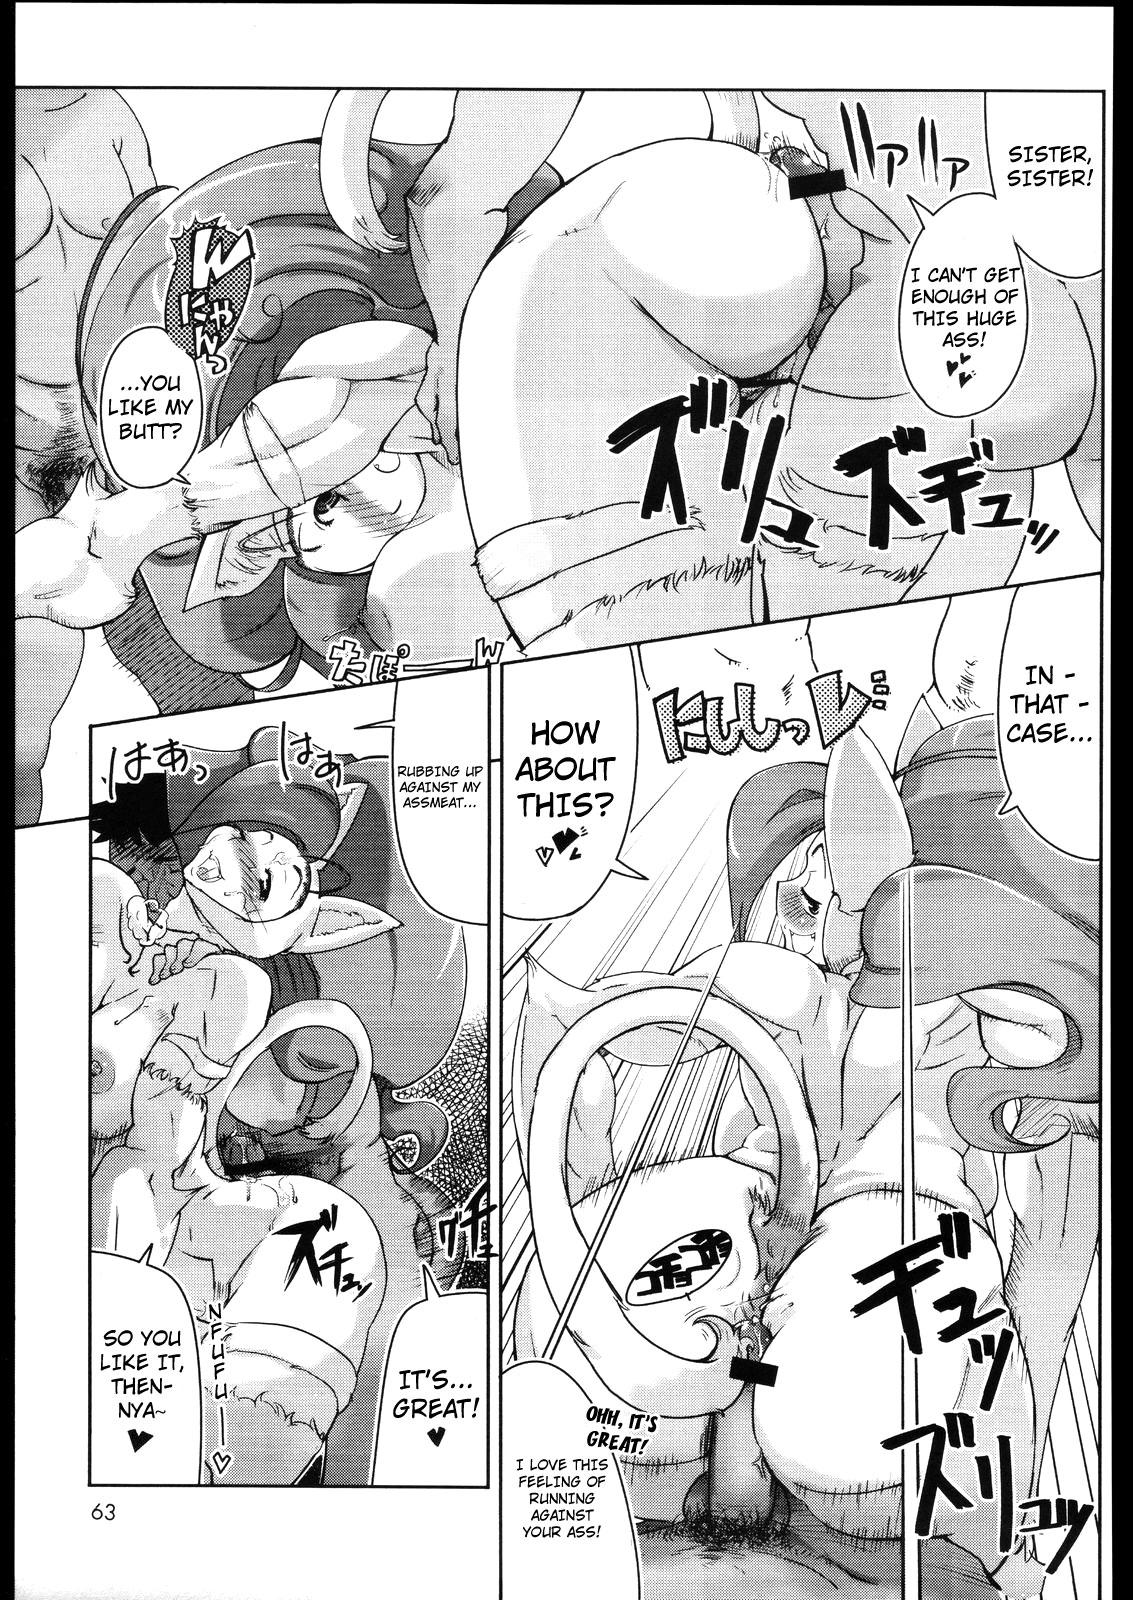 Asia Always Cheerful! - Darkstalkers Pay - Page 9